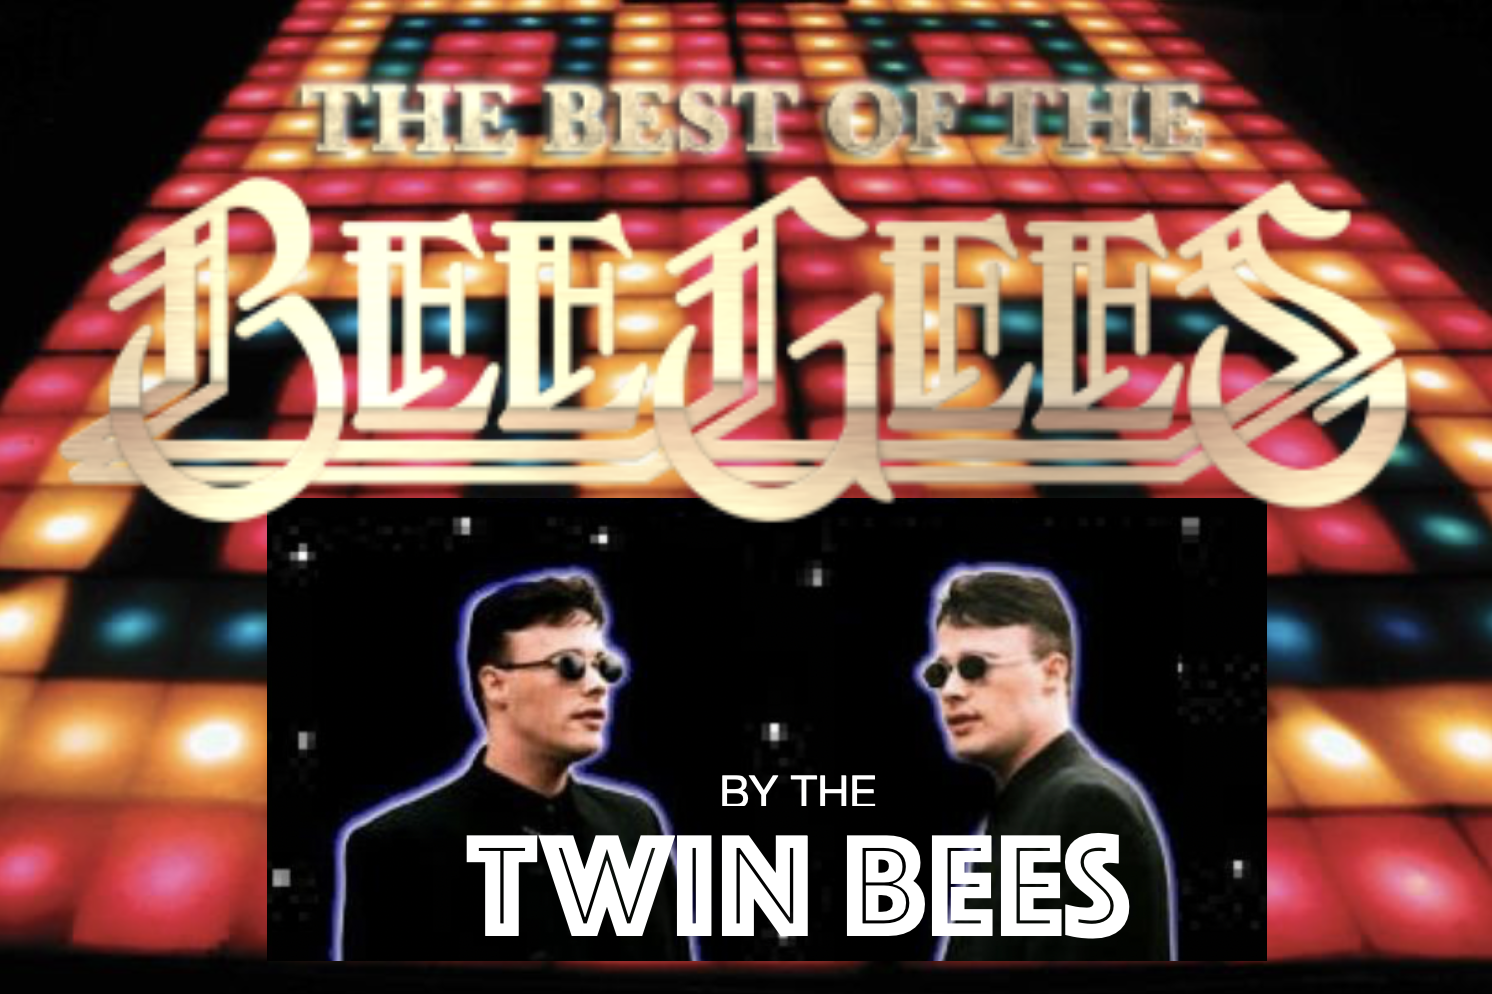 BEE GEES by the Twin Bees